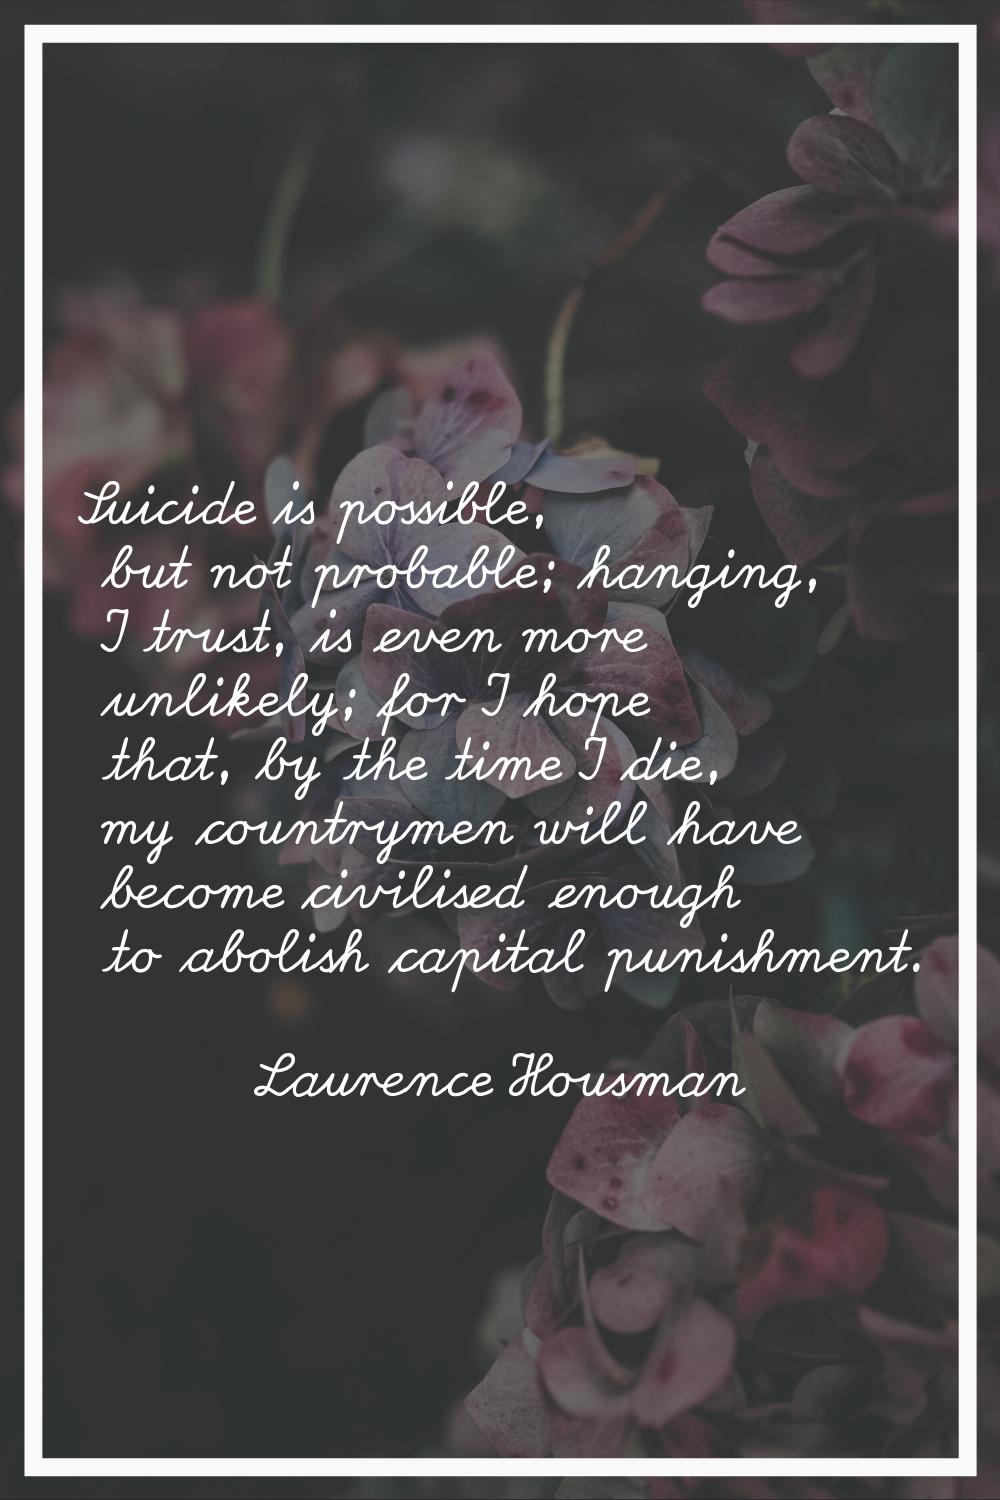 Suicide is possible, but not probable; hanging, I trust, is even more unlikely; for I hope that, by